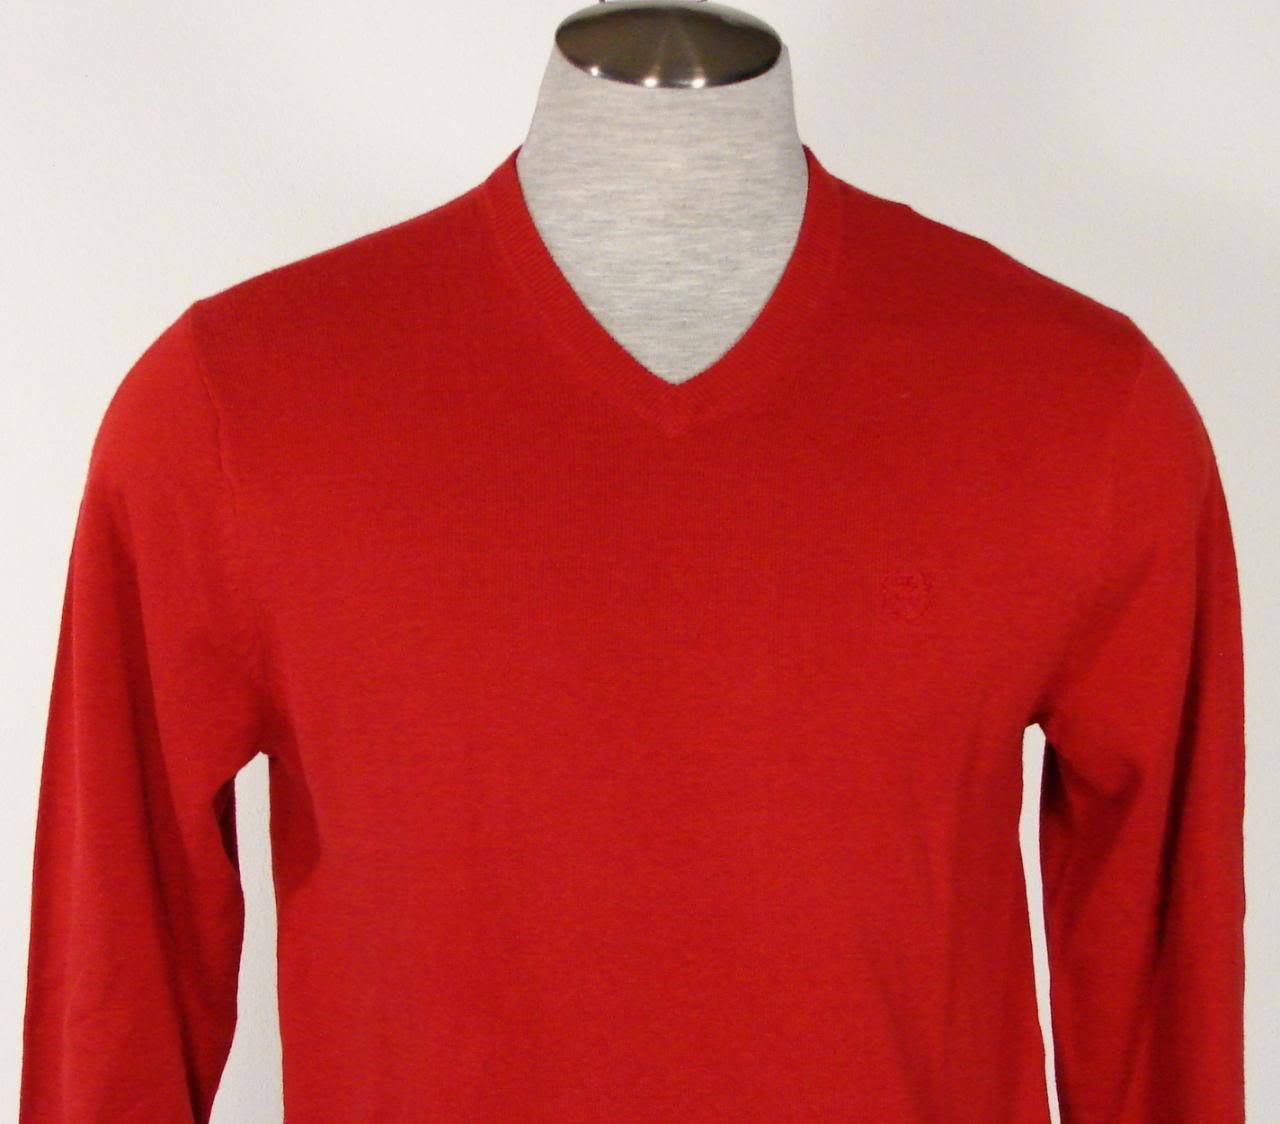 Izod V Neck Red Cotton Blend Knit Sweater Mens NWT - Sweaters